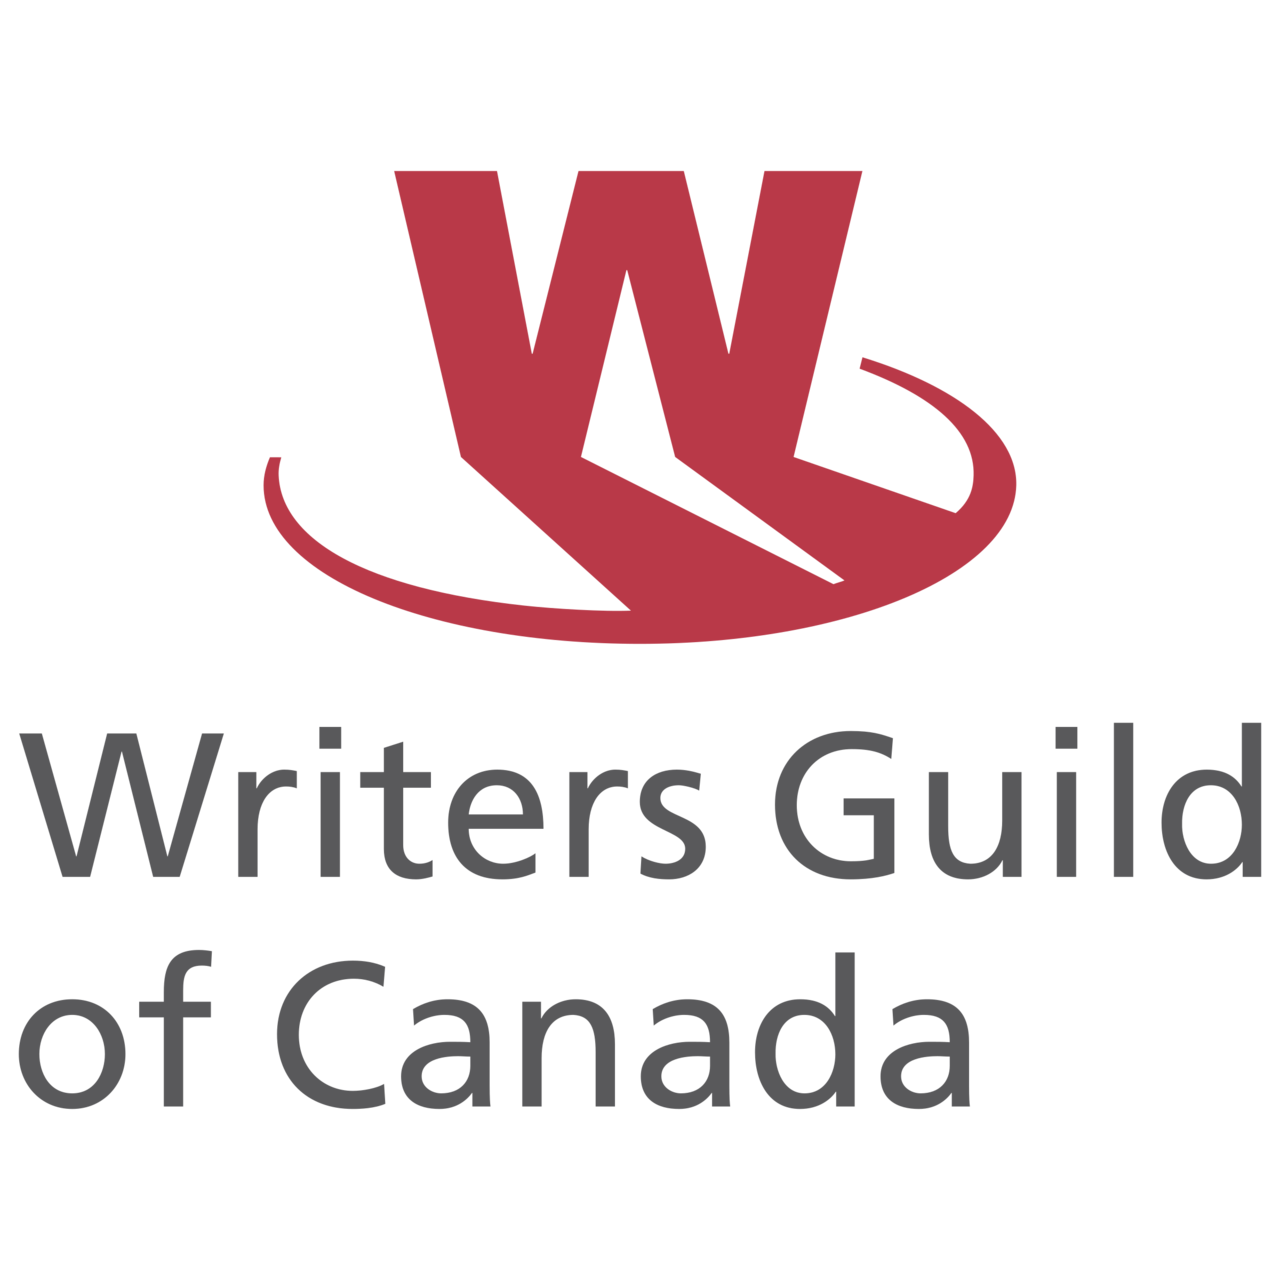 Writers Guild of Canada logo